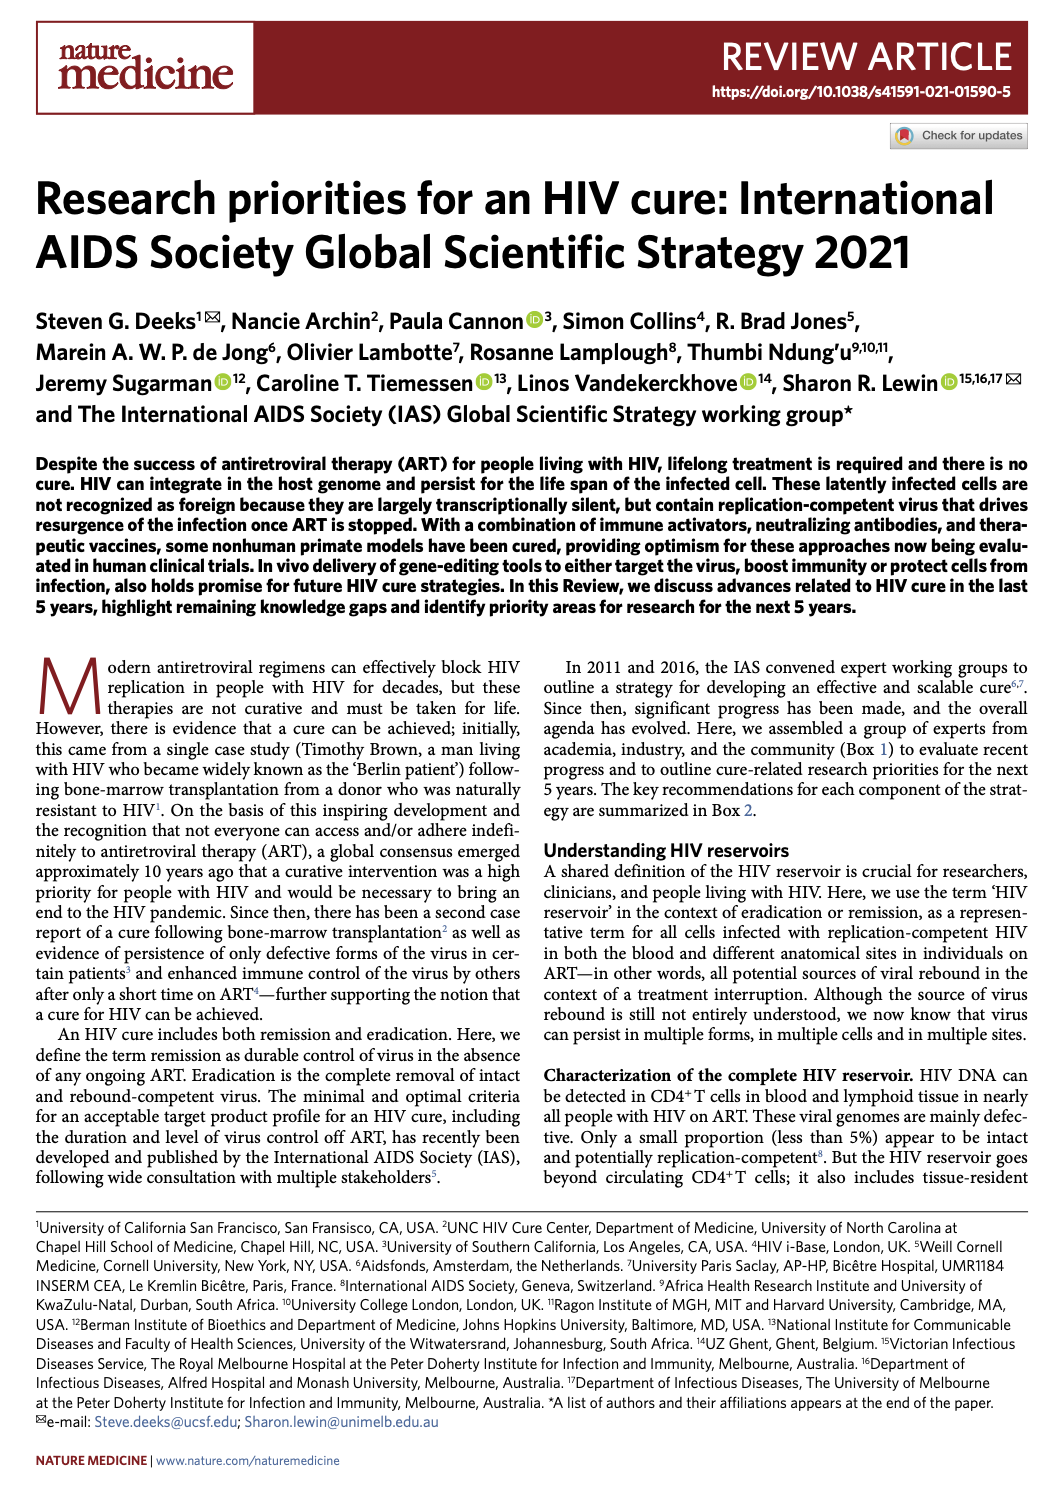 IAS review on HIV cure research A global scientific strategy to cure